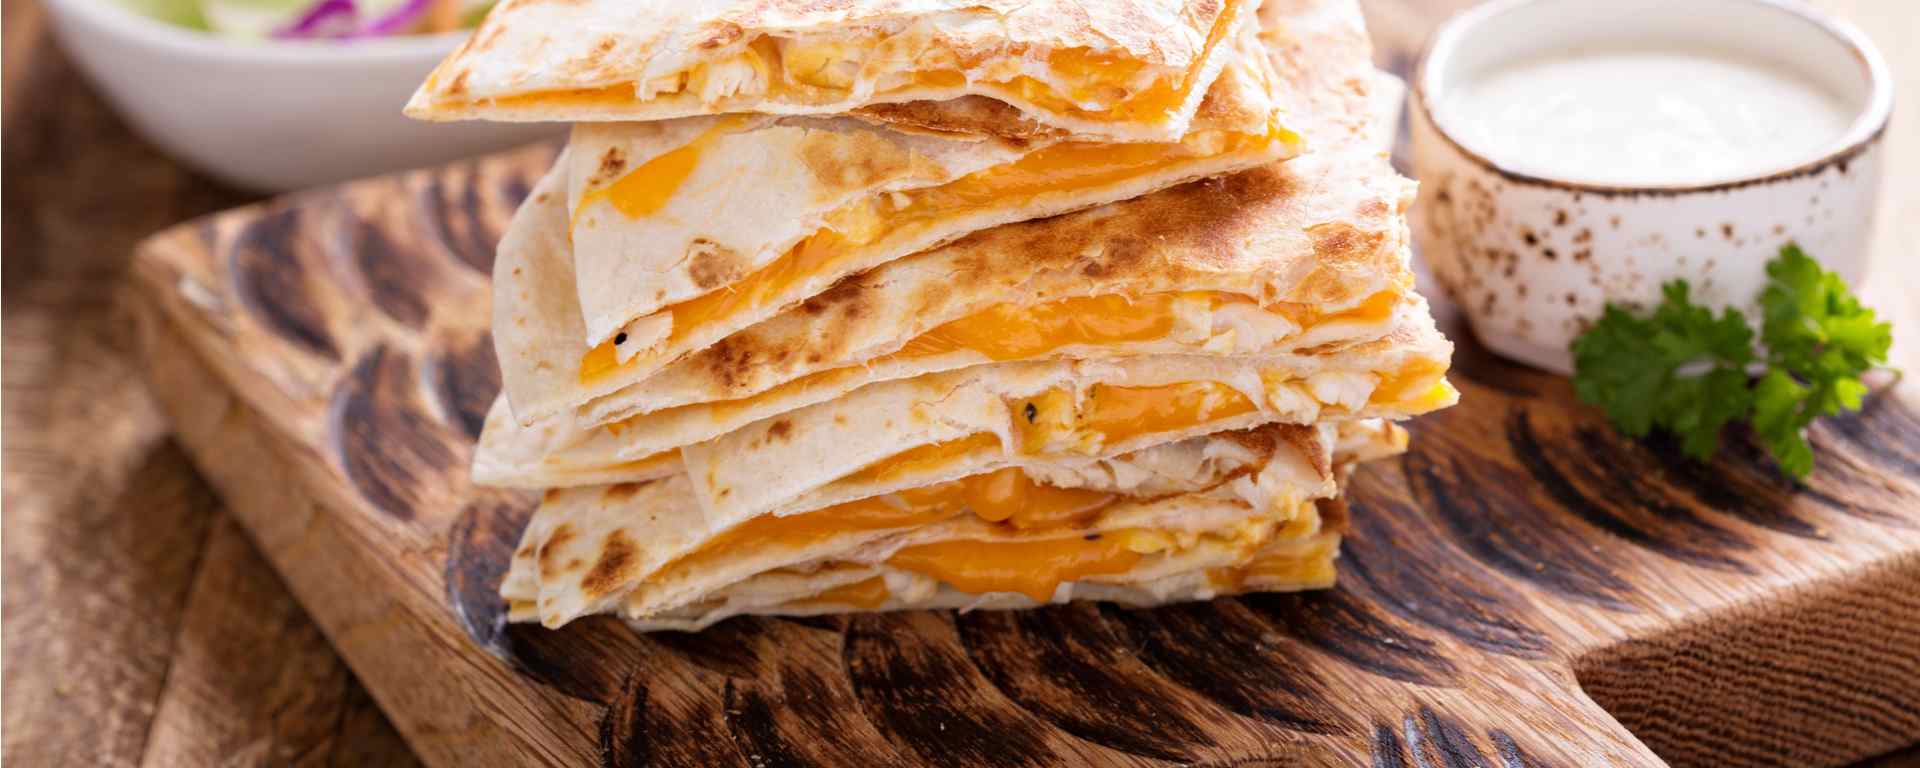 Photo for - Goat Cheese Quesadillas